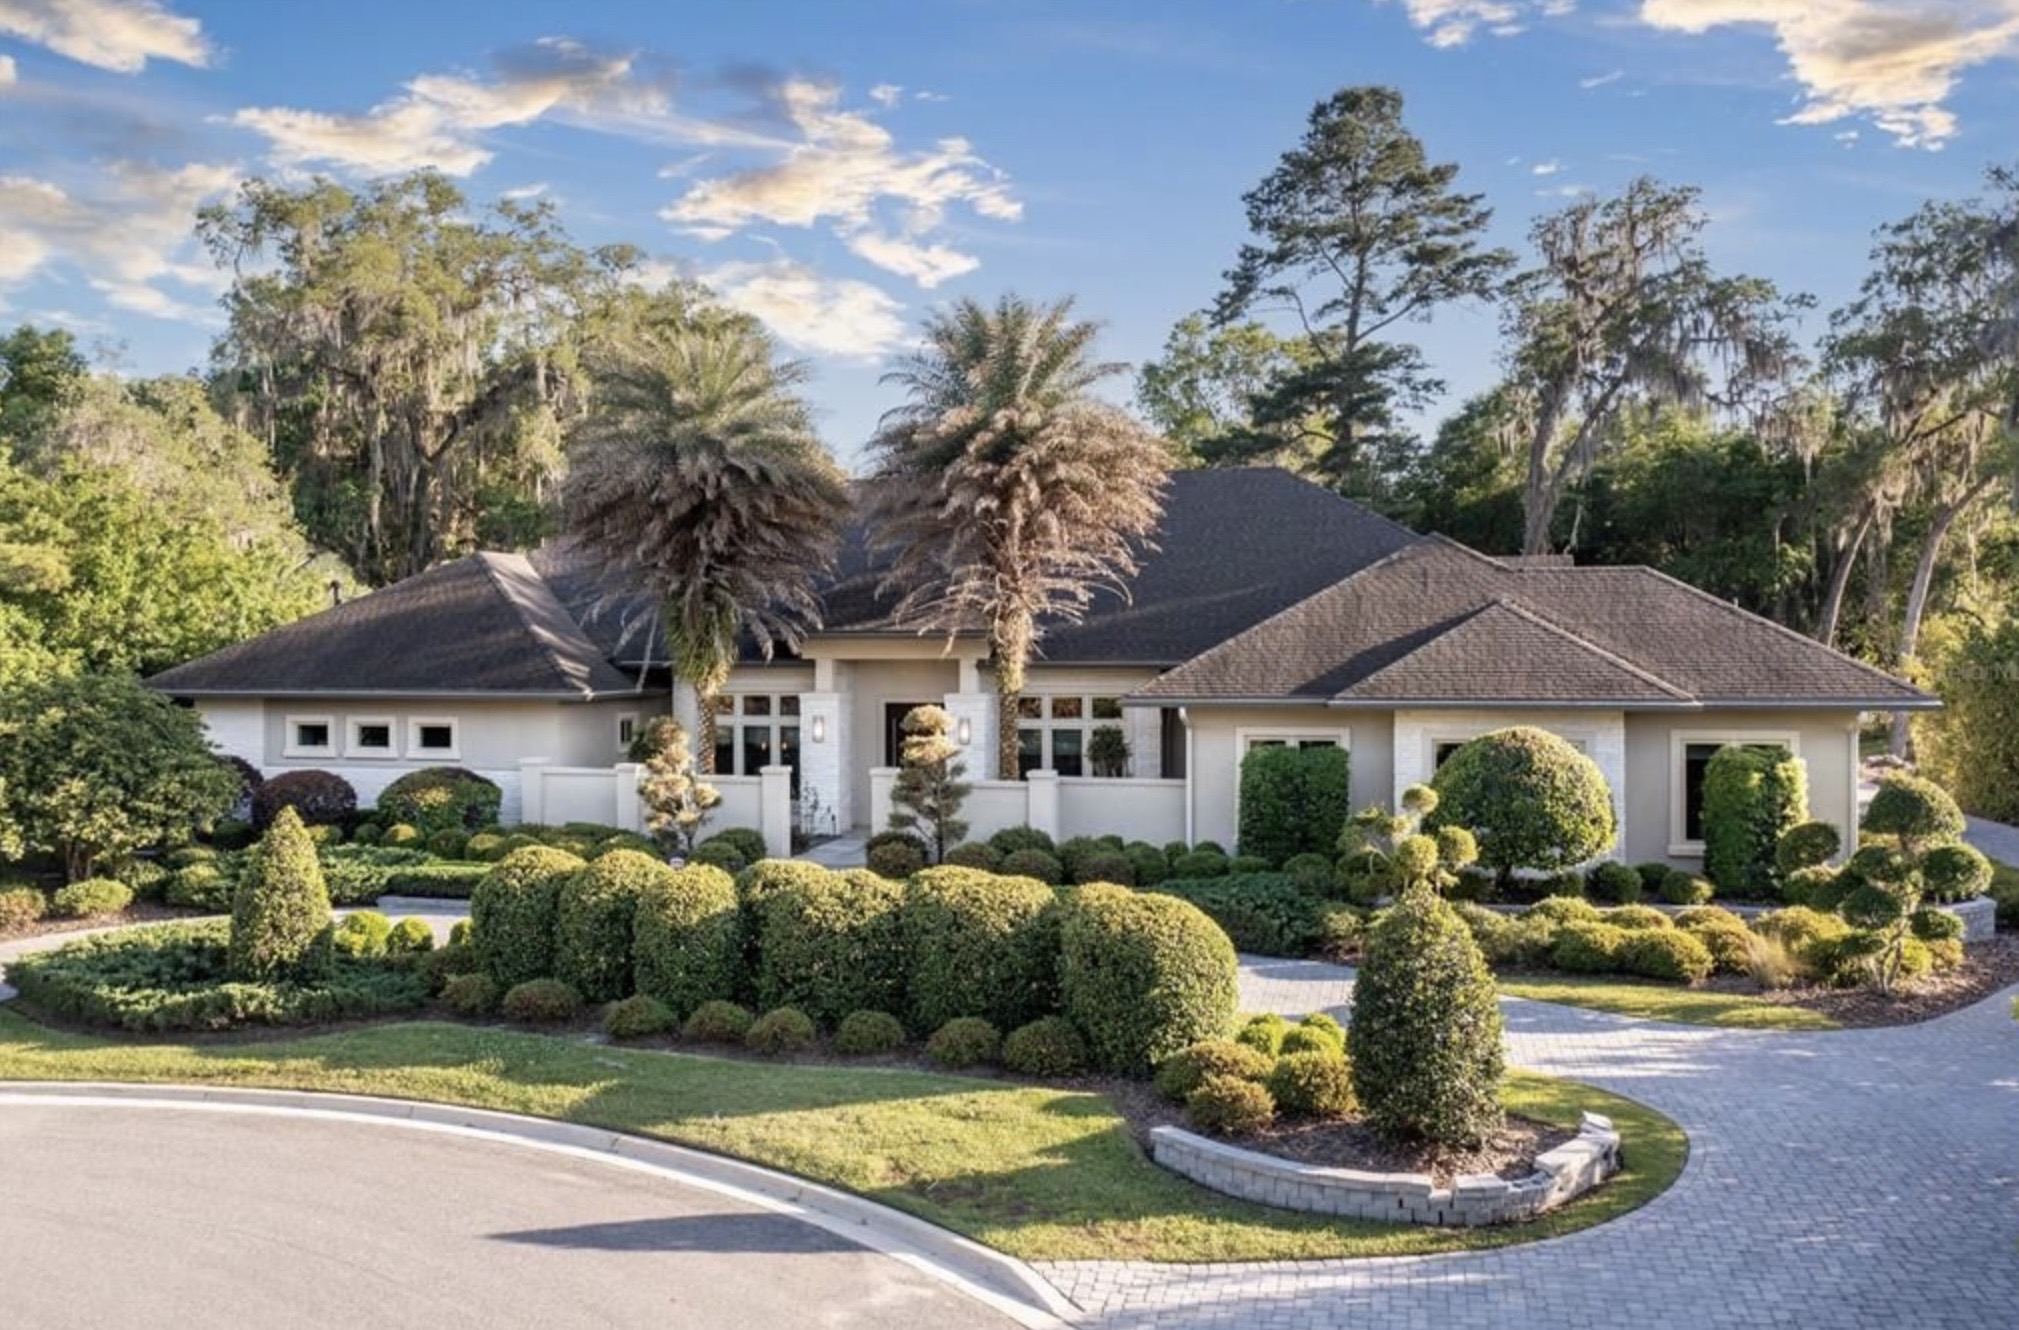 Haile Plantation Homes For Sale in Gainesville, FL